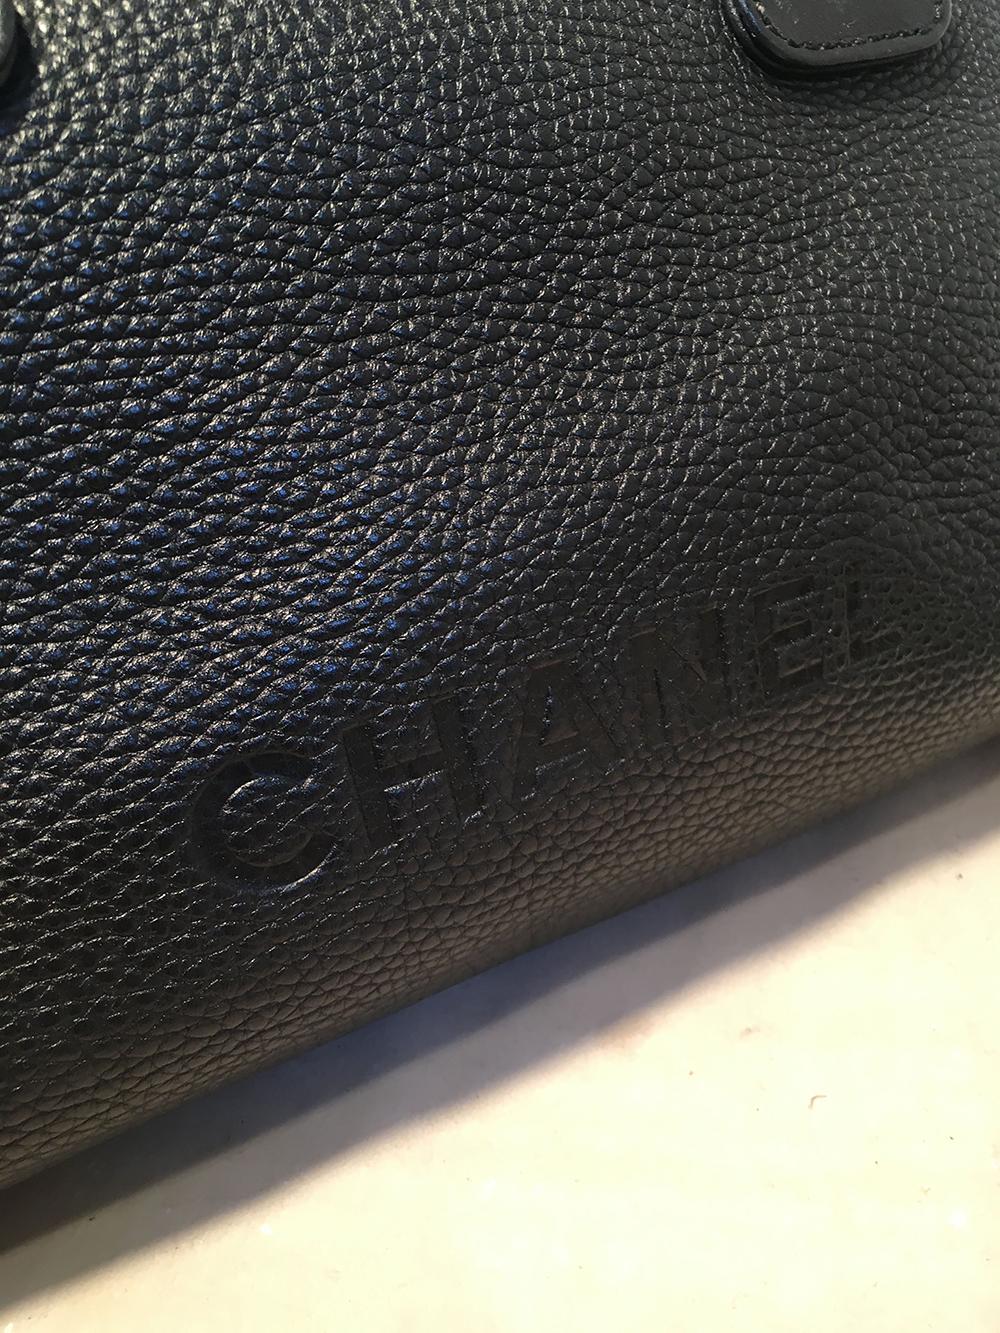 Chanel Lax Black Leather Tassel Bag In Excellent Condition For Sale In Philadelphia, PA